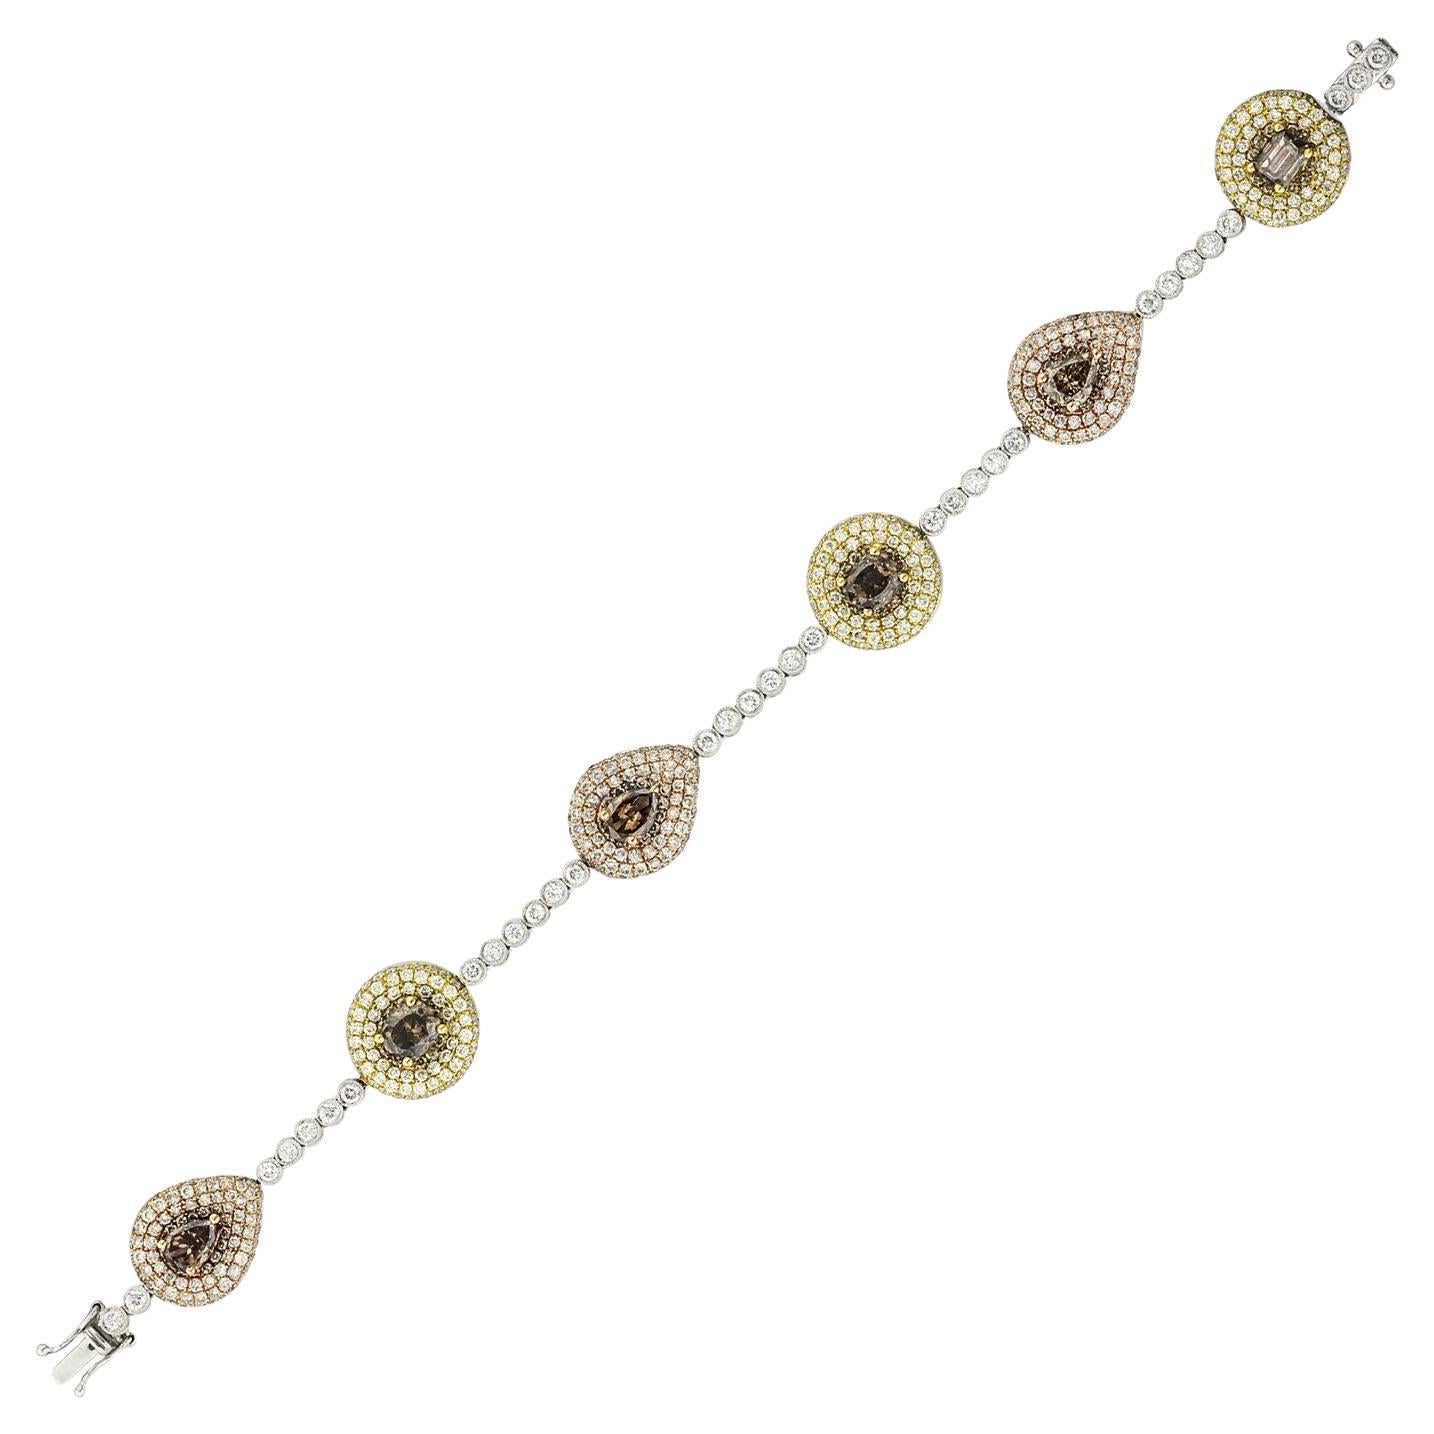 Diana M. Jewels 18kt gold bracelet featuring 8.10 cts of fancy color diamonds For Sale